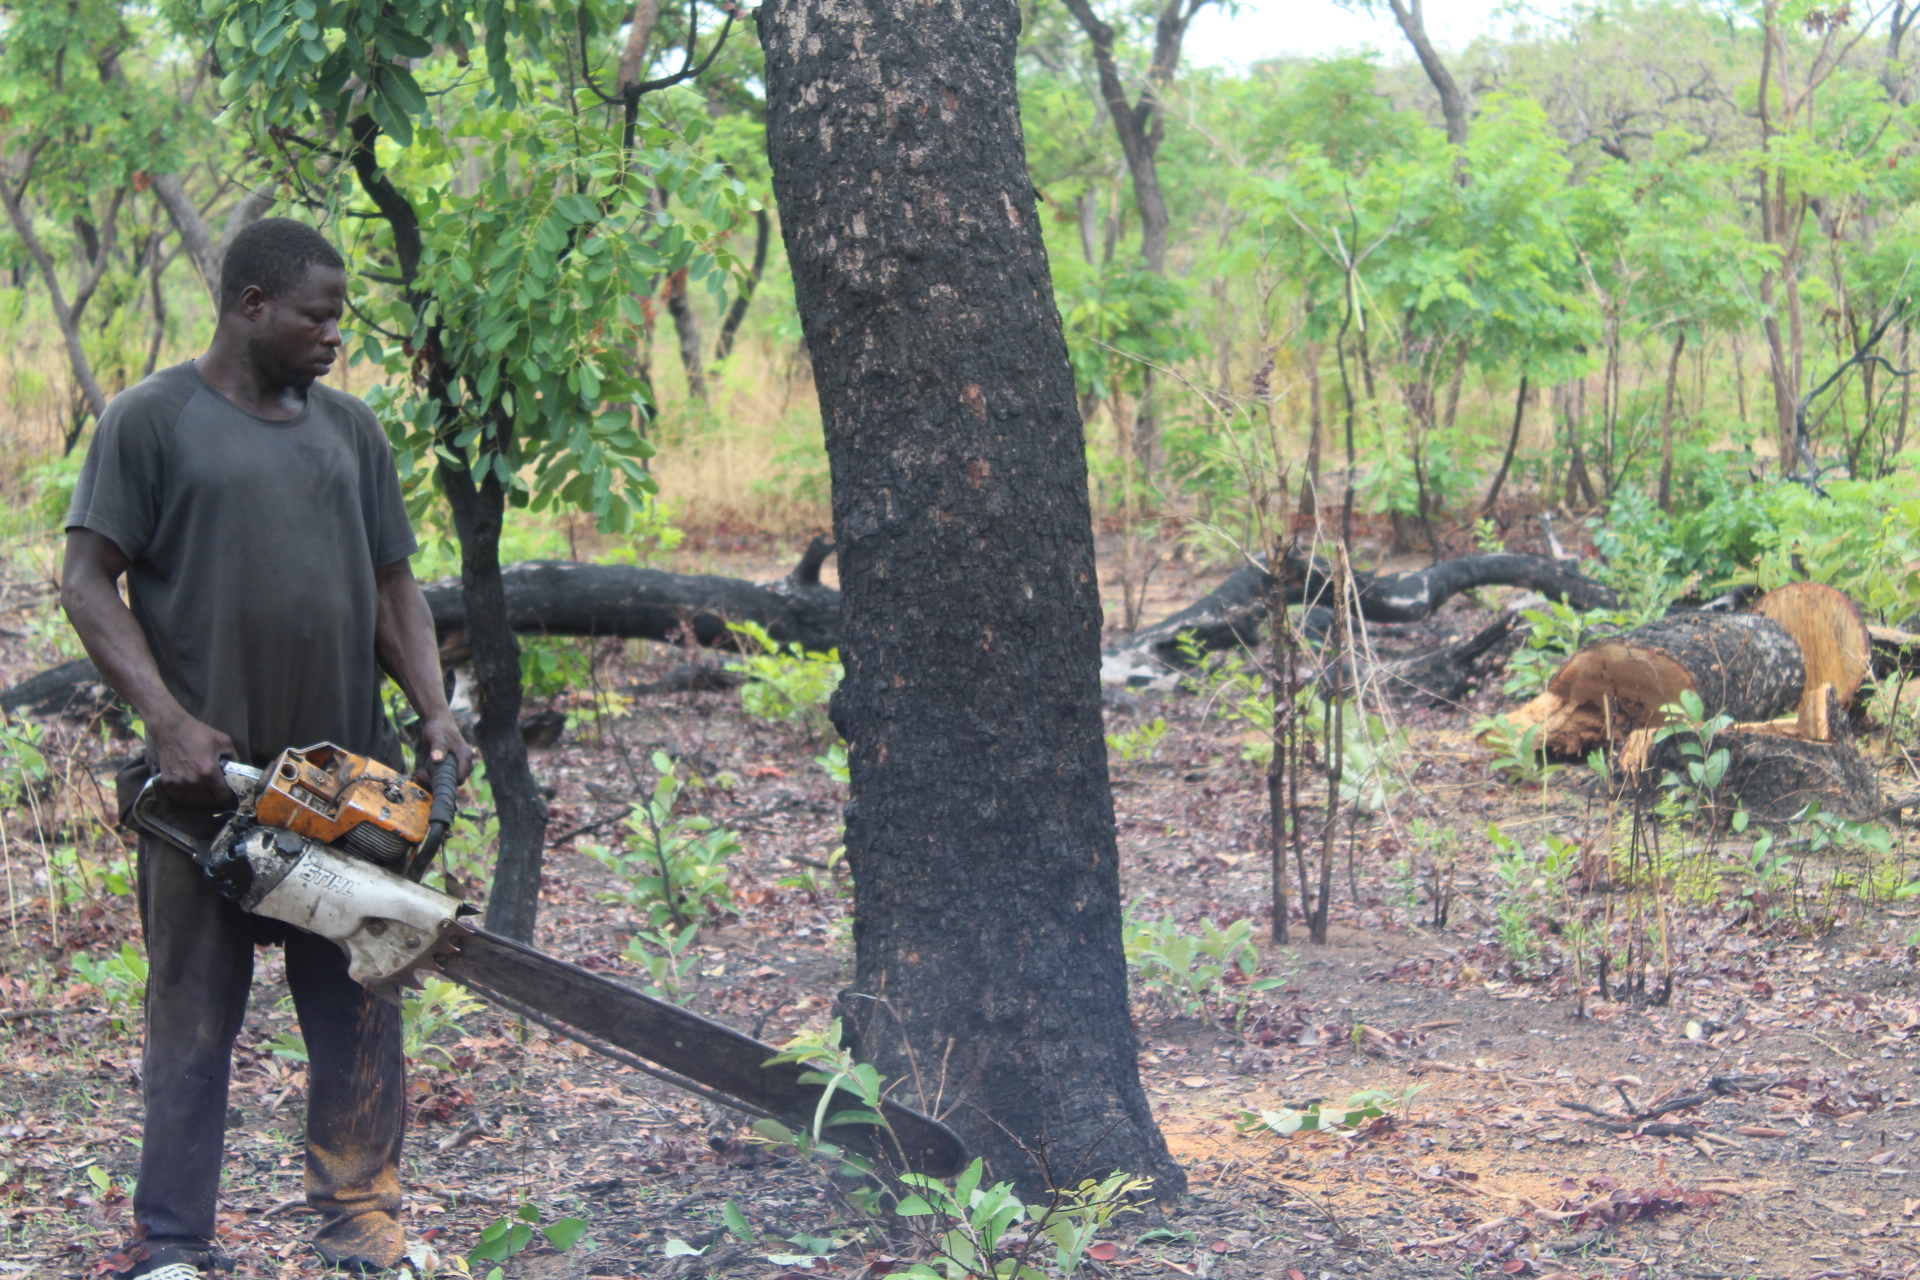 Mapping Charcoal Production Sites